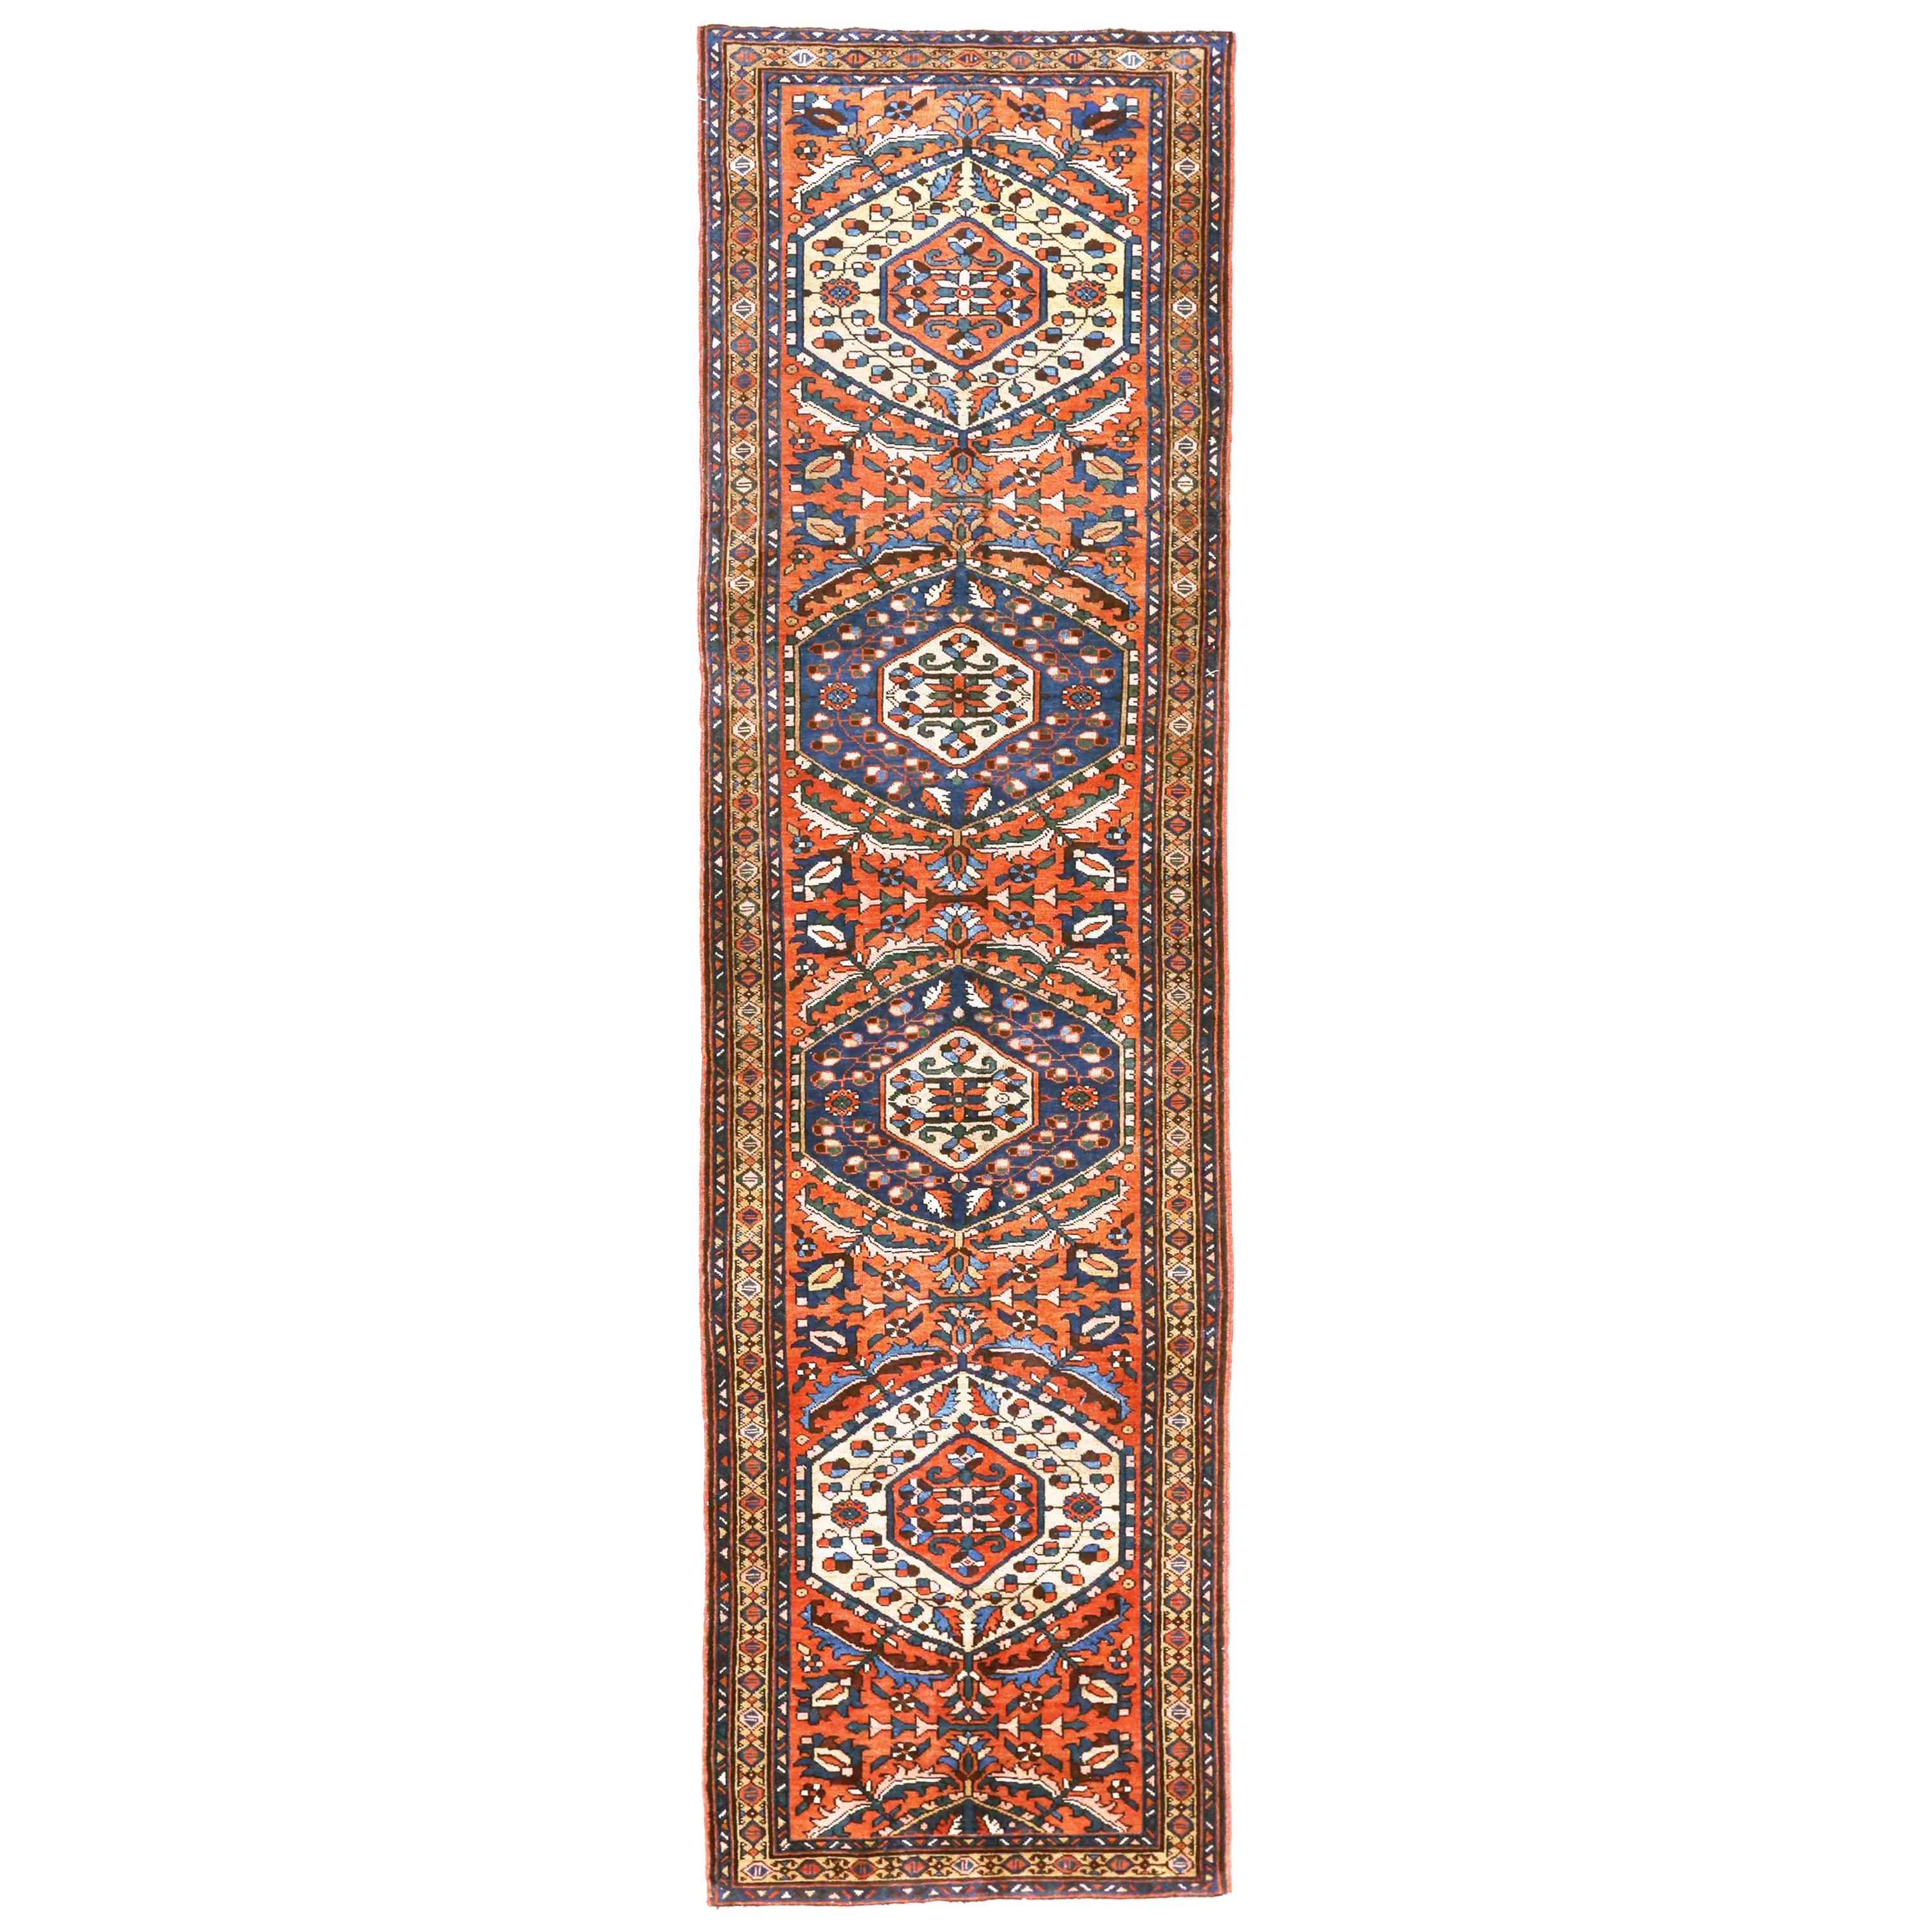 Antique Persian Rug Azerbaijan Design with Nature-Inspired Patterns, circa 1960s